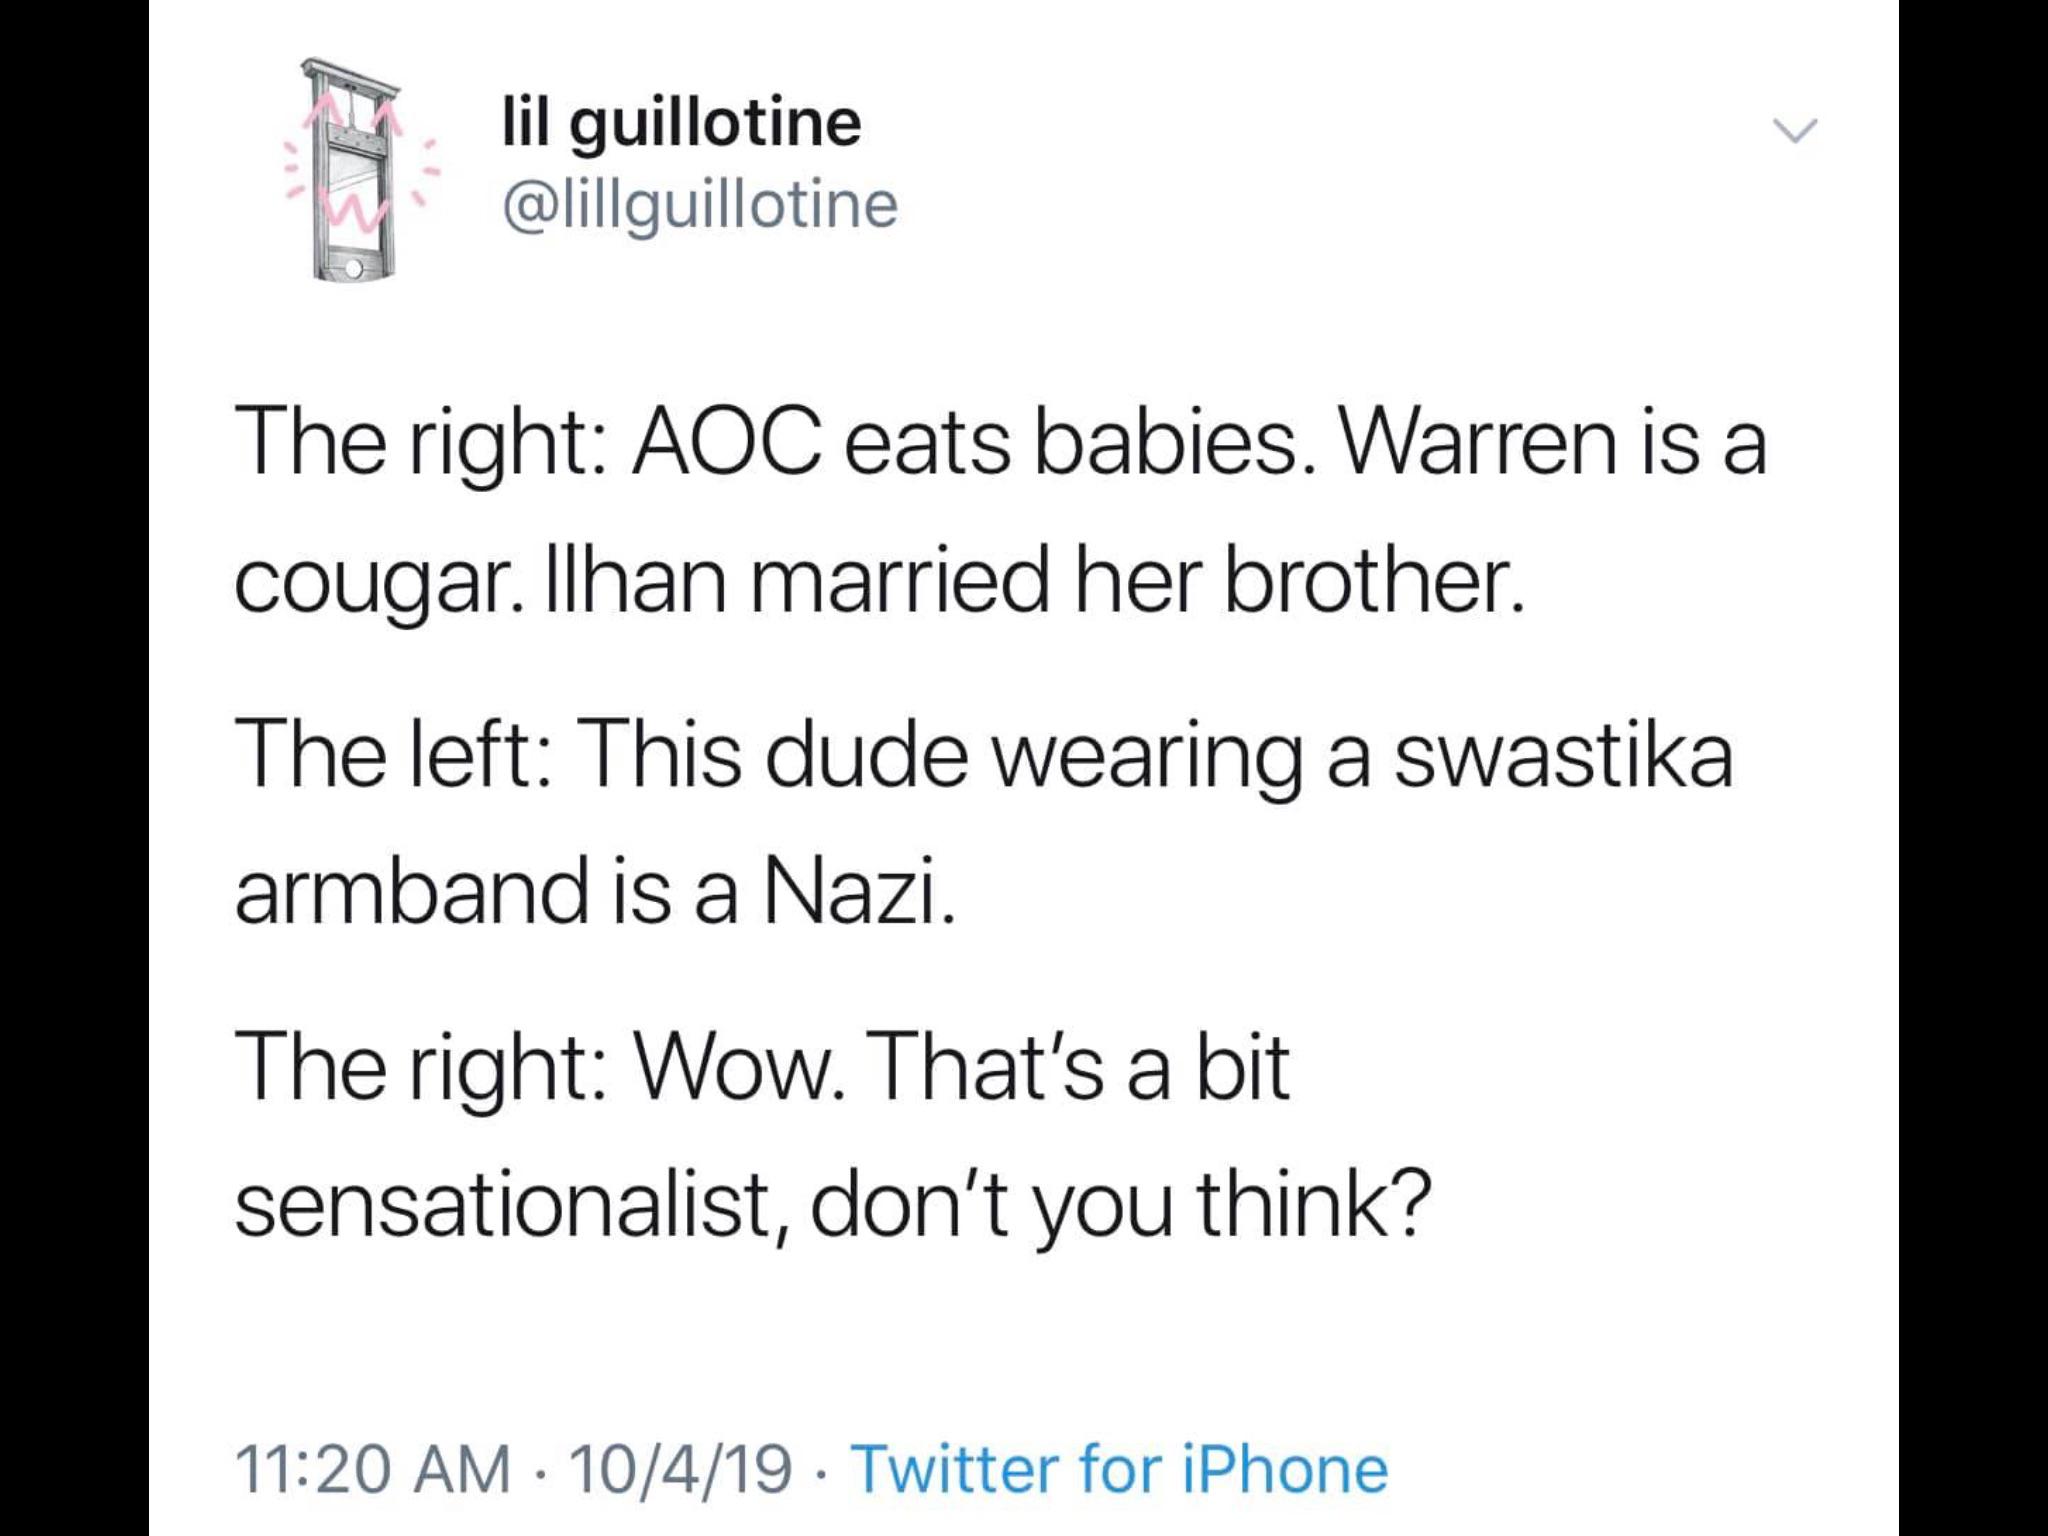 political political-memes political text: lil guillotine @lillguillotine The right: AOC eats babies. Warren is a cougar. llhan married her brother. The left: This dude wearing a swastika armband is a Nazi. The right: Wow. That's a bit sensationalist, don't you think? 11:20 AM • 10/4/19 • Twitter for iPhone 